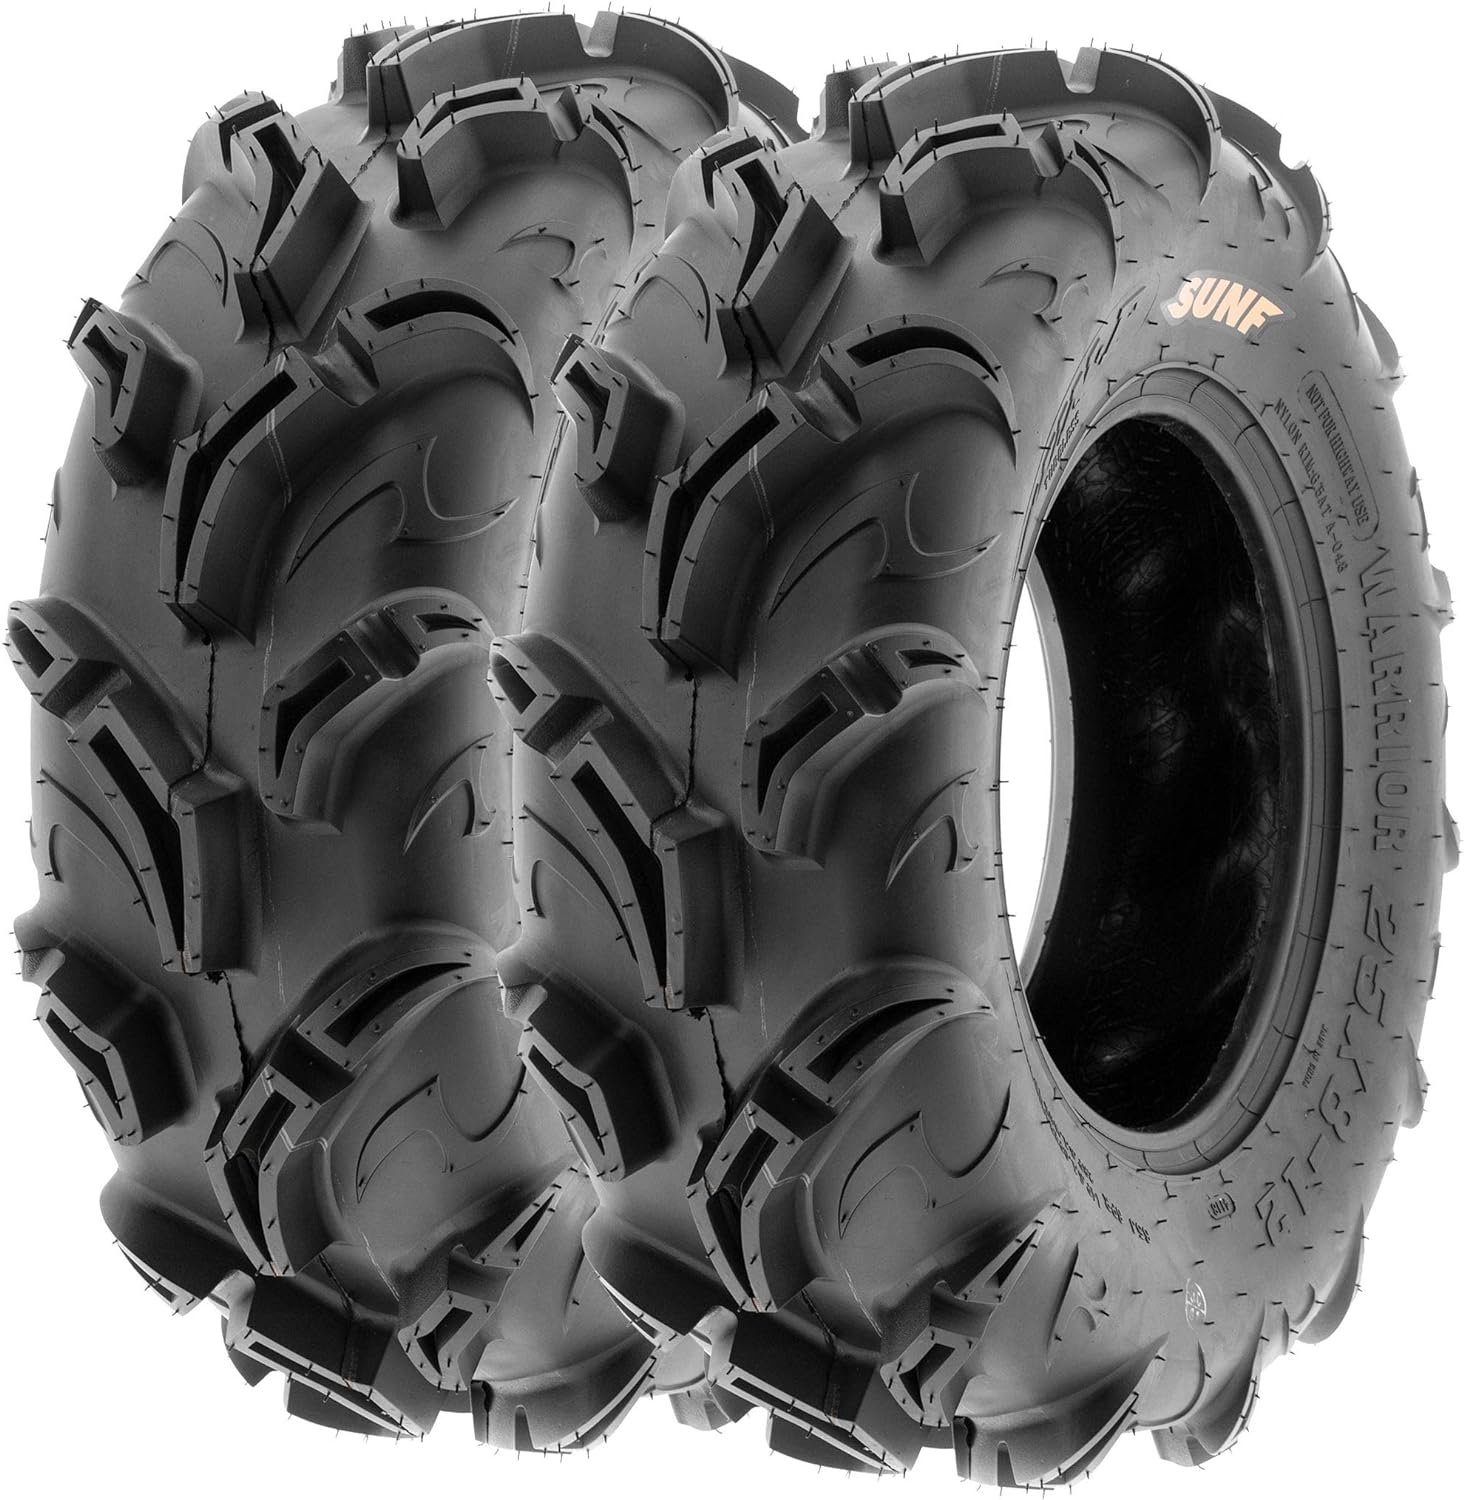 Set of 4 SunF ATV Mud Trail Tires 25x8-12 and 25x10-12, 6 Ply A048